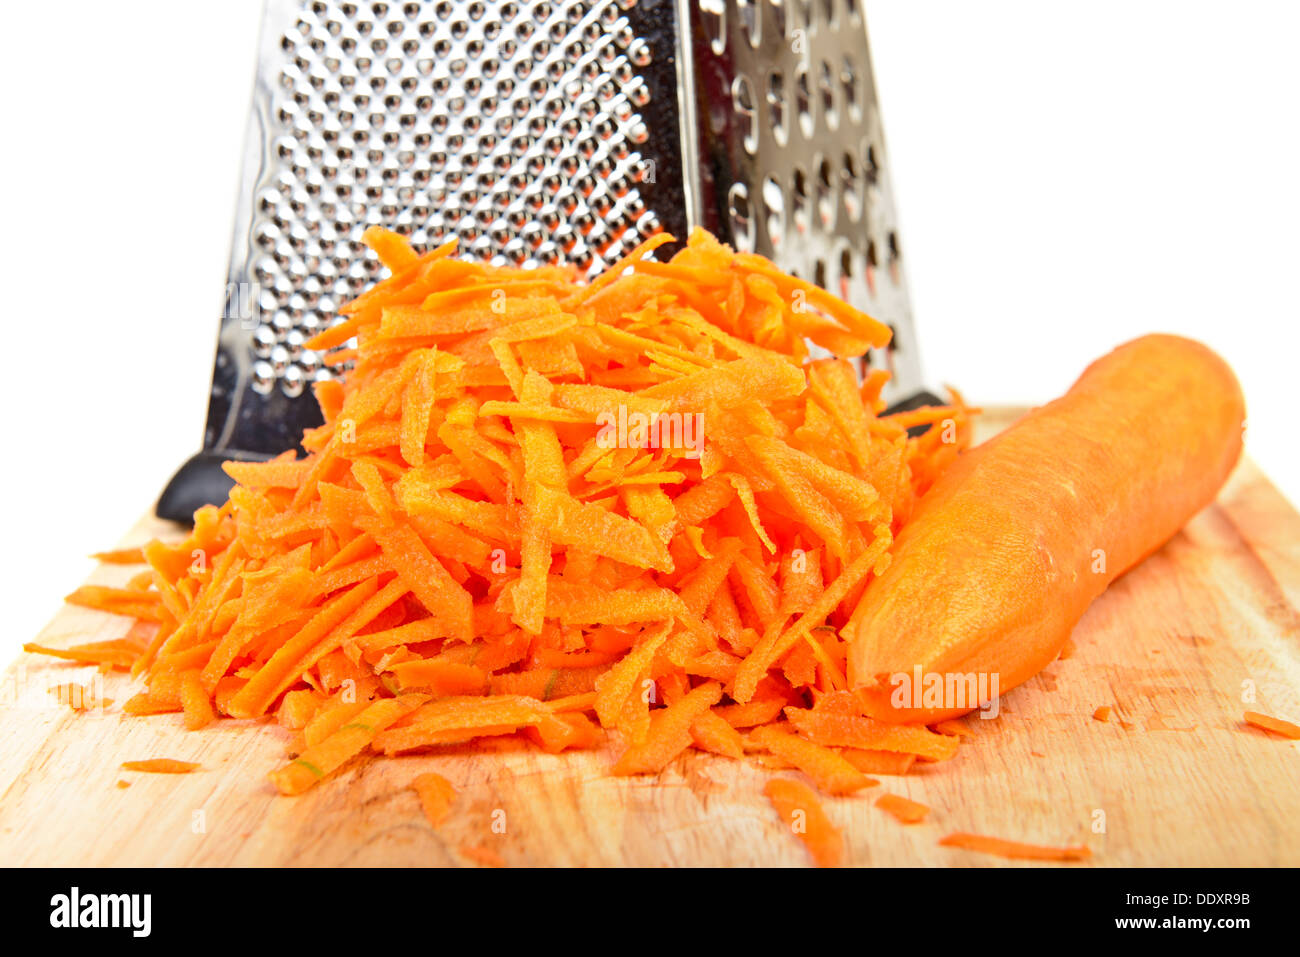 5+ Thousand Carrot Grater Royalty-Free Images, Stock Photos